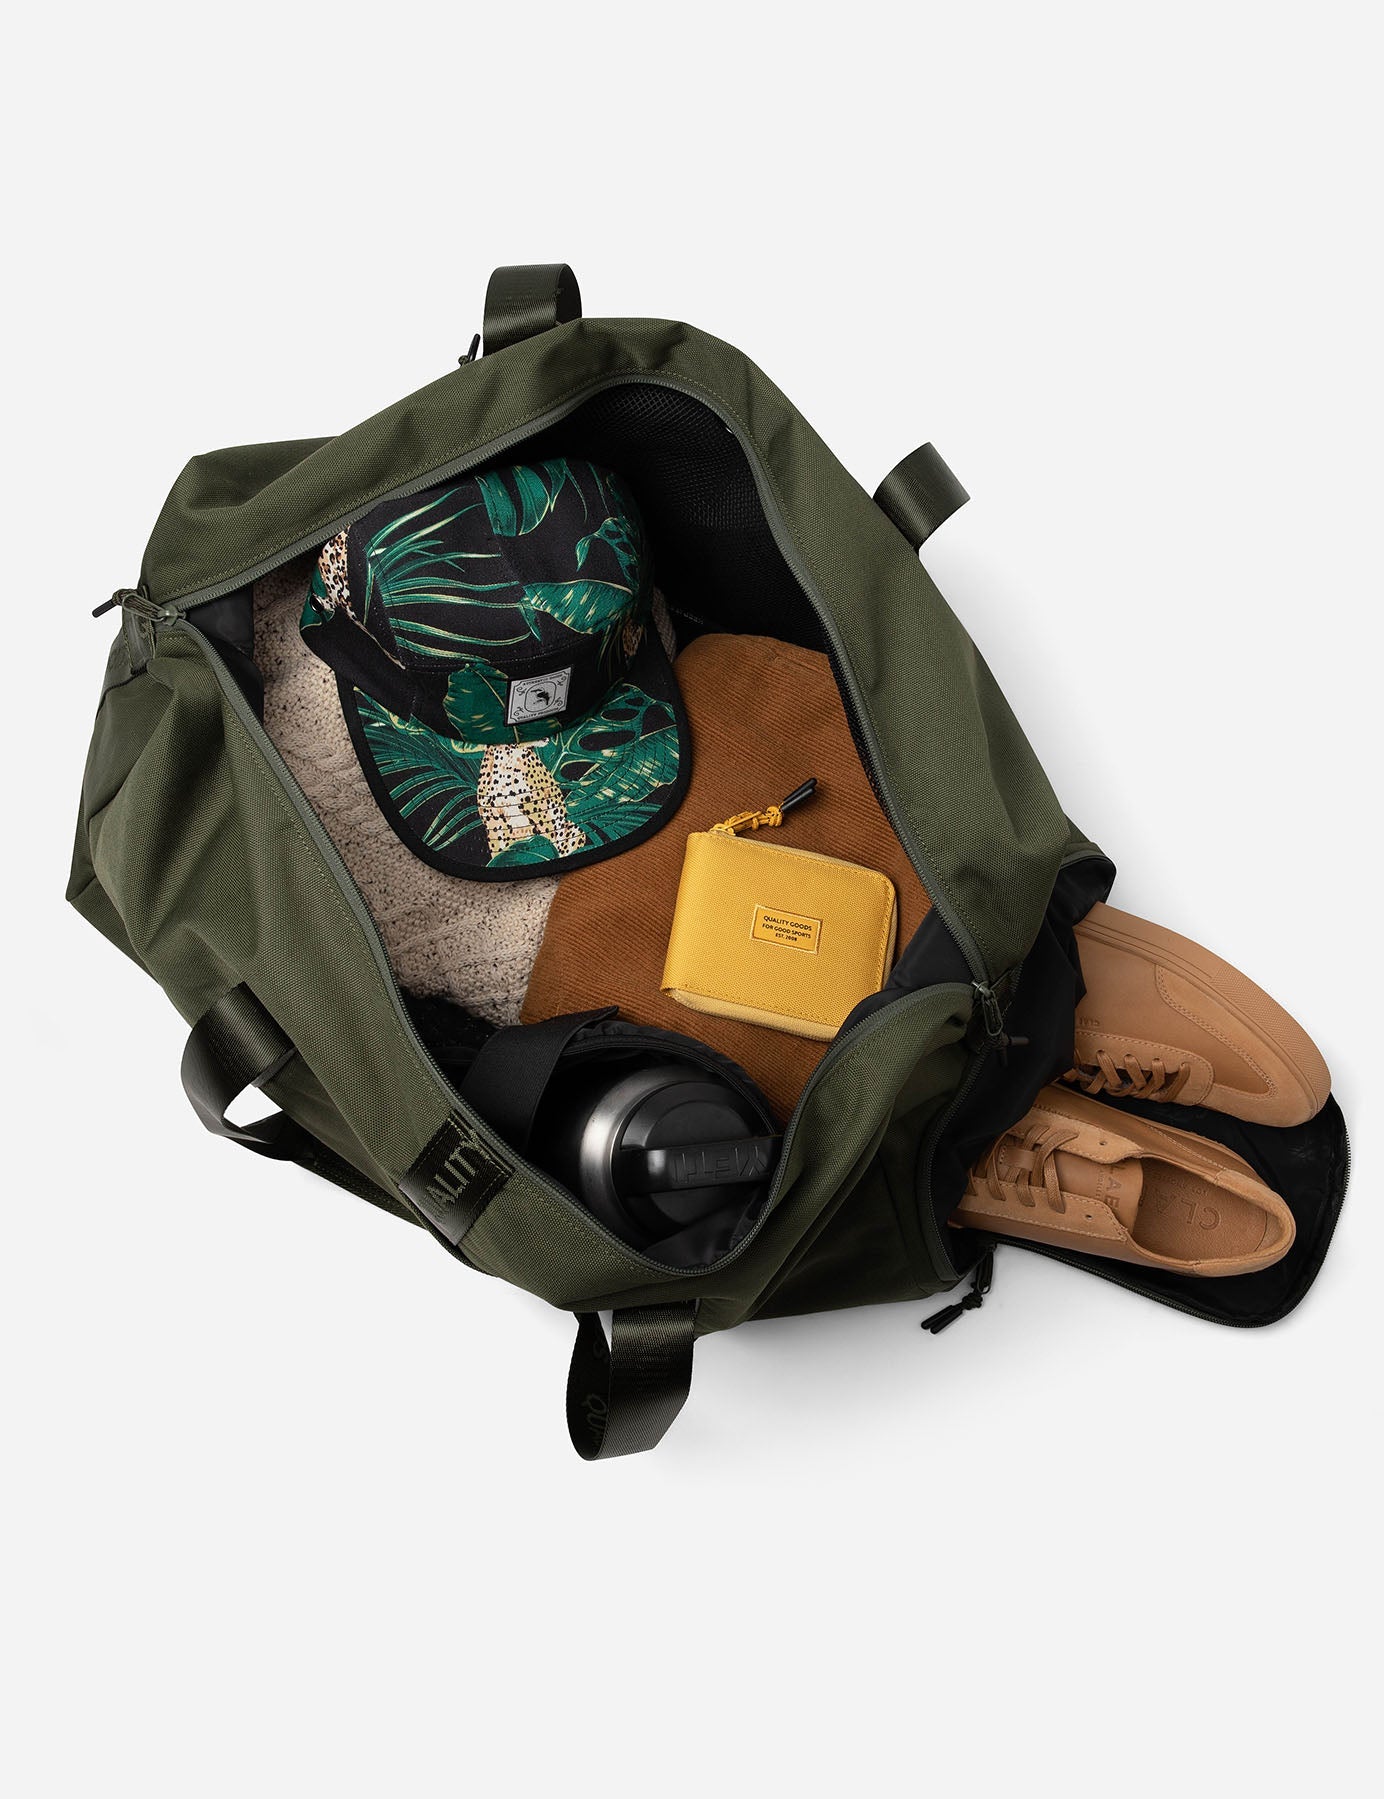 Nelson Duffle - Army